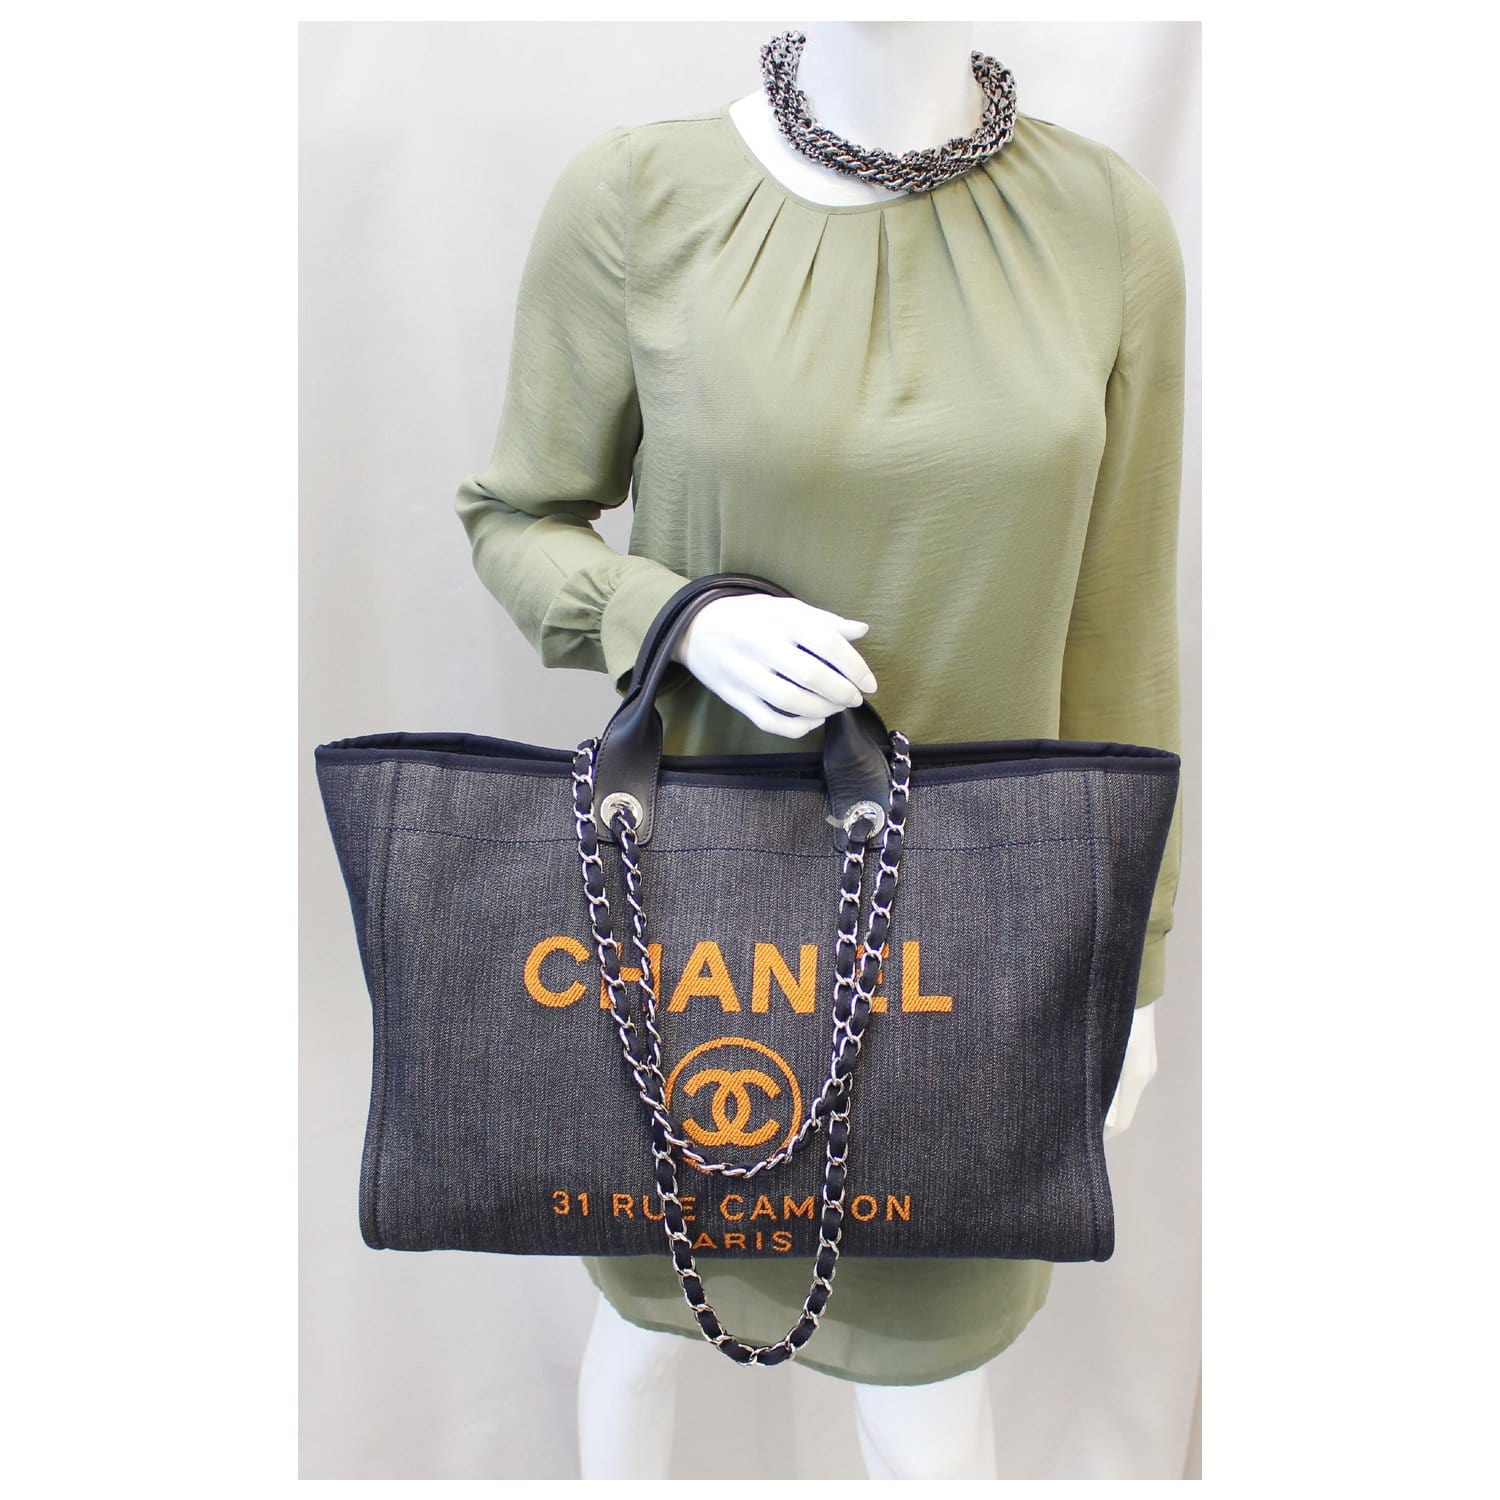 Authentic Chanel Deauville Canvas Tote Bag